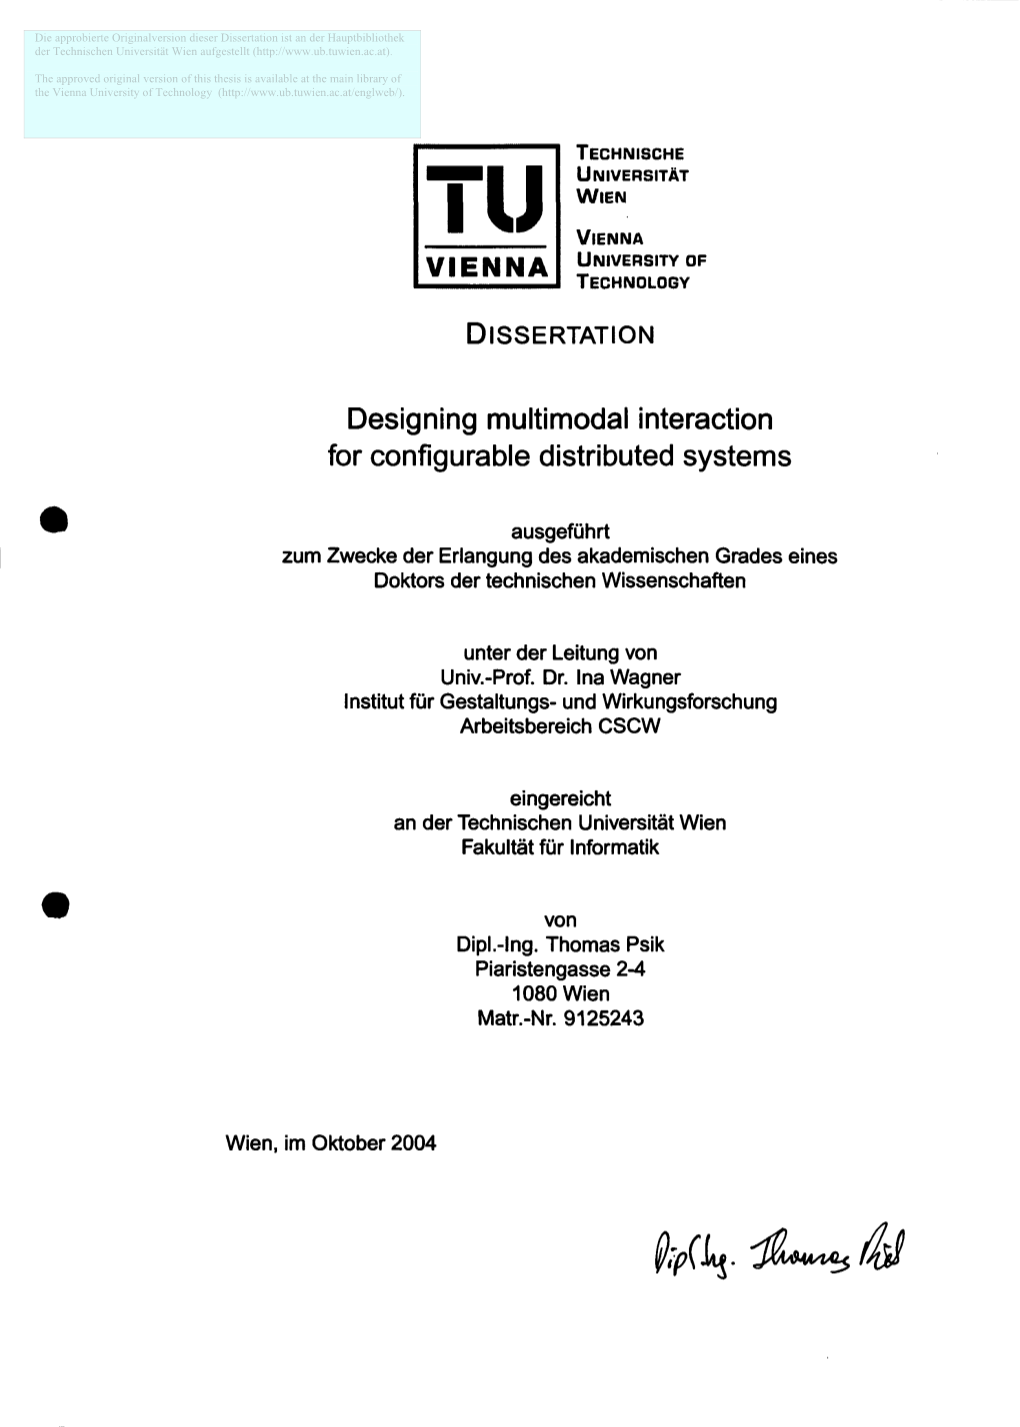 Designing Multimodal Interaction for Configurable Distributed Systems